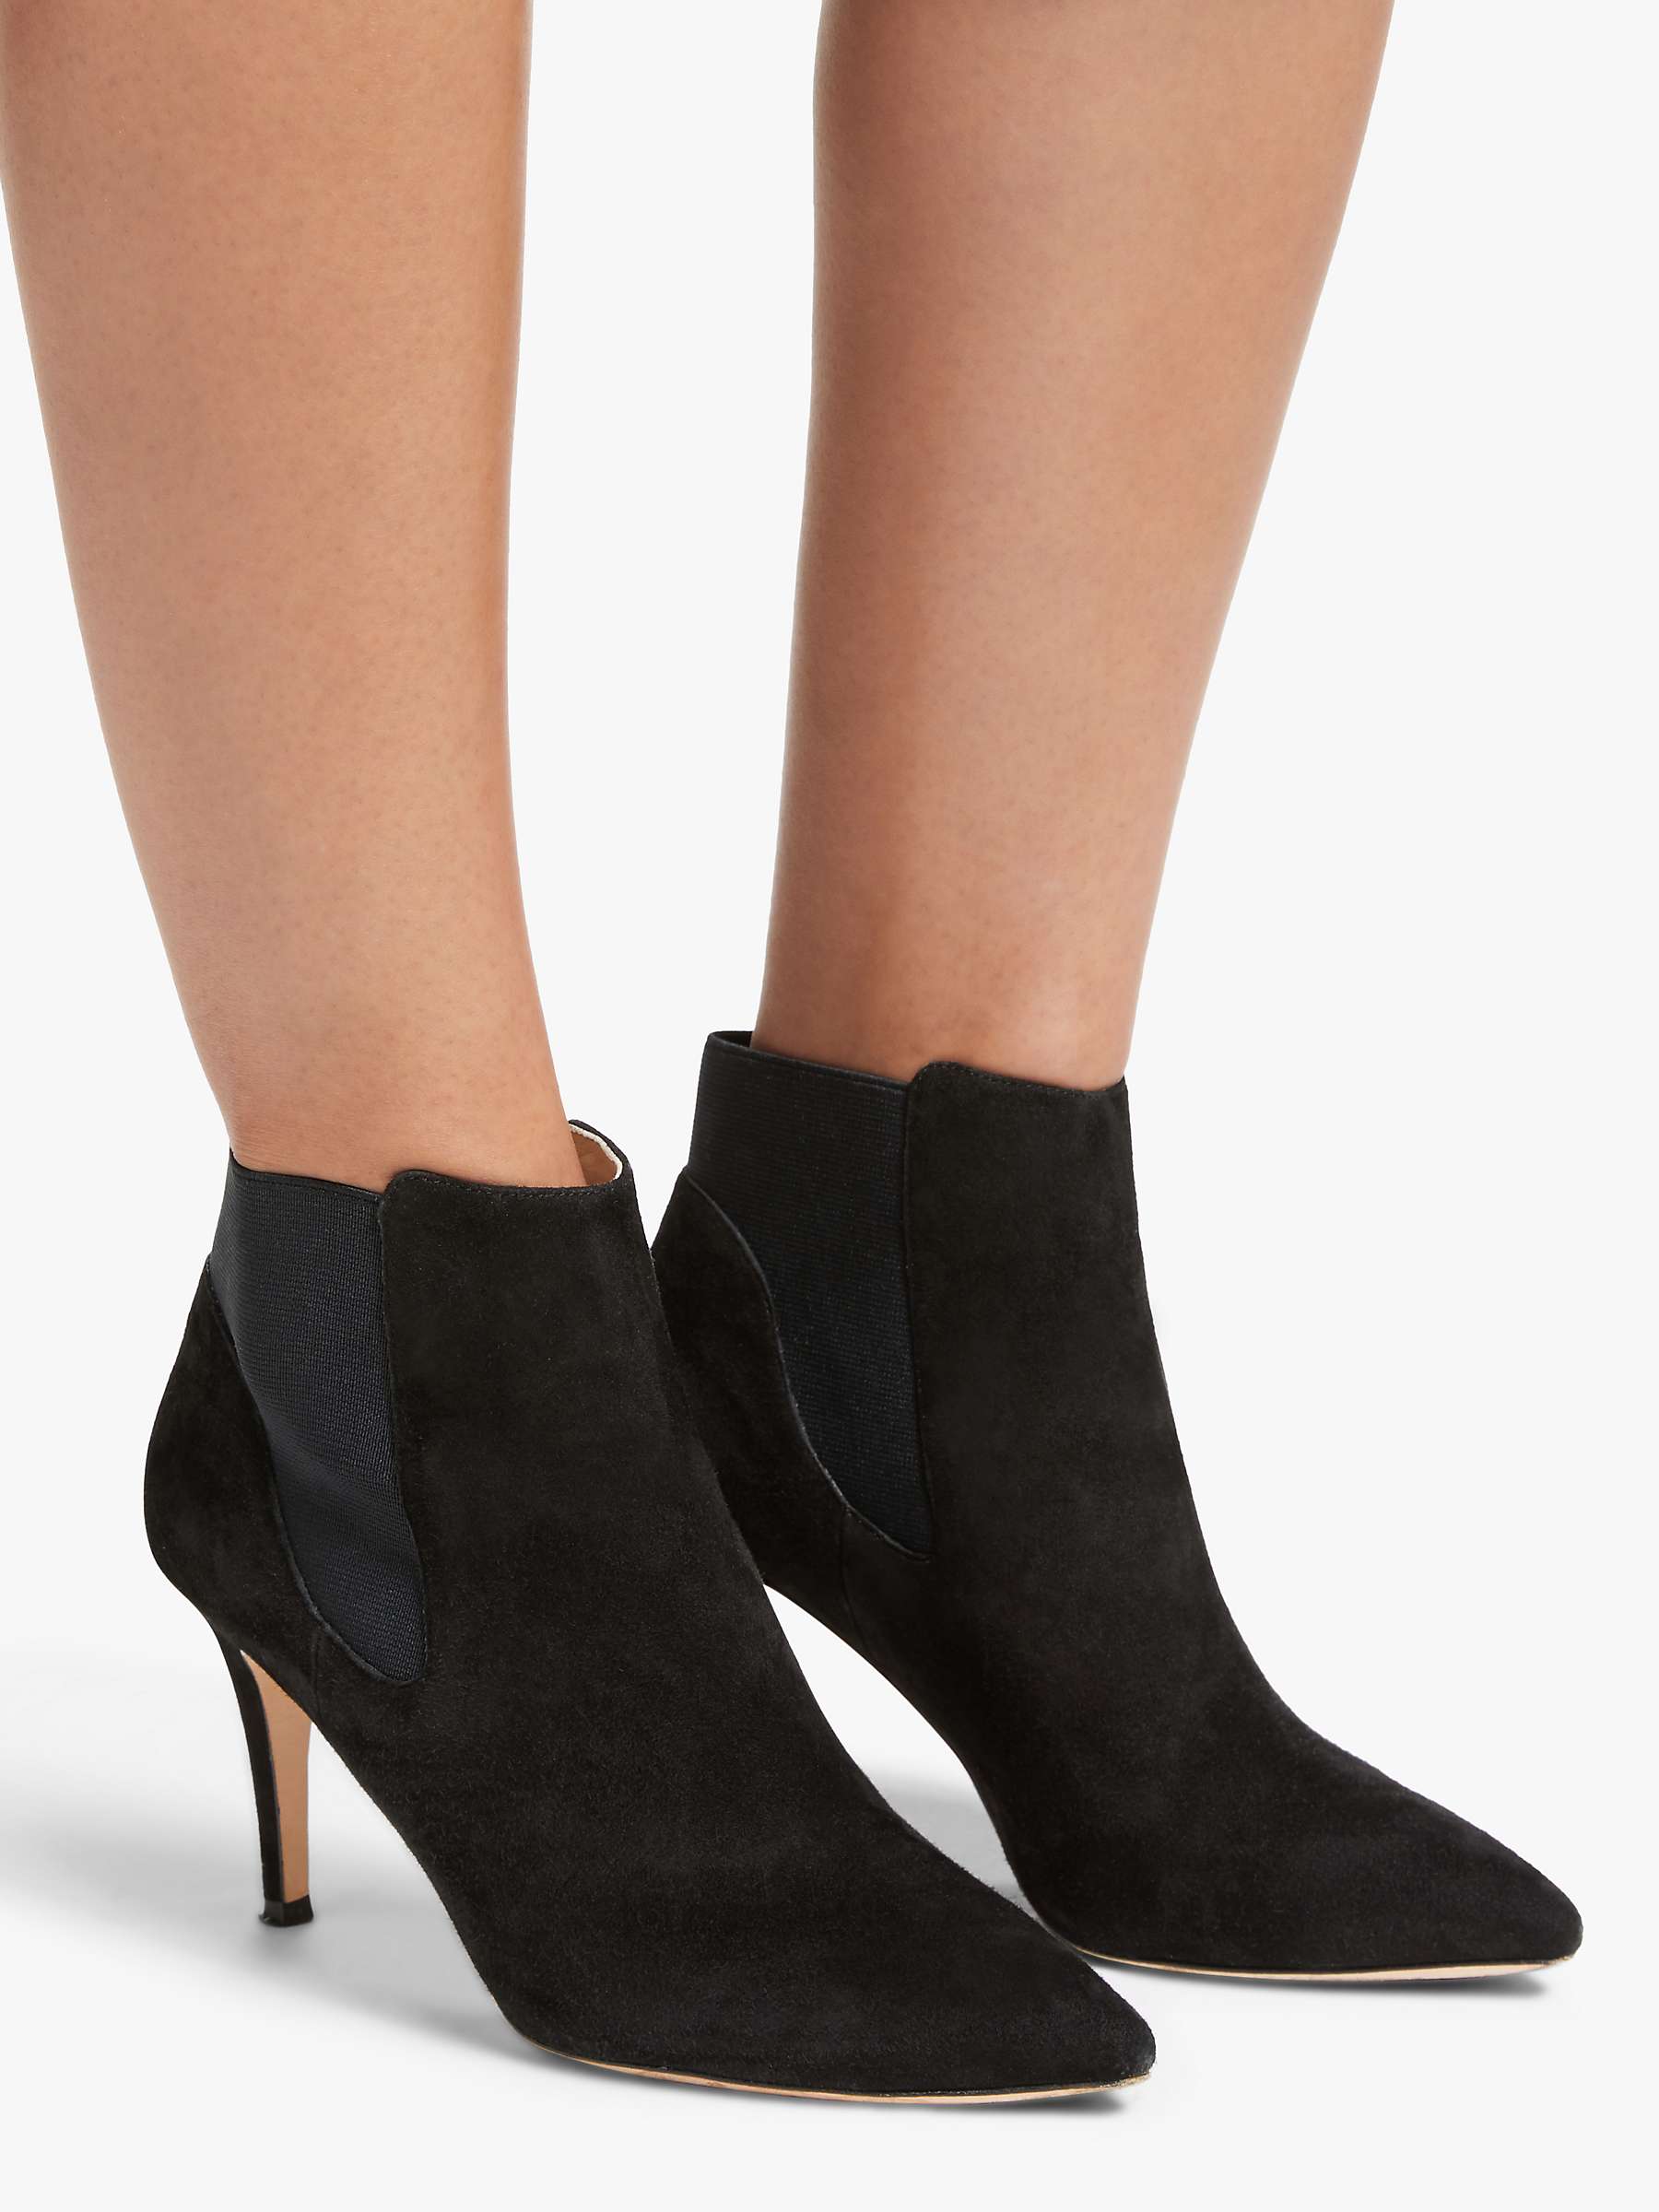 Boden Elsworth Pointed Toe Ankle Boots, Black at John Lewis & Partners